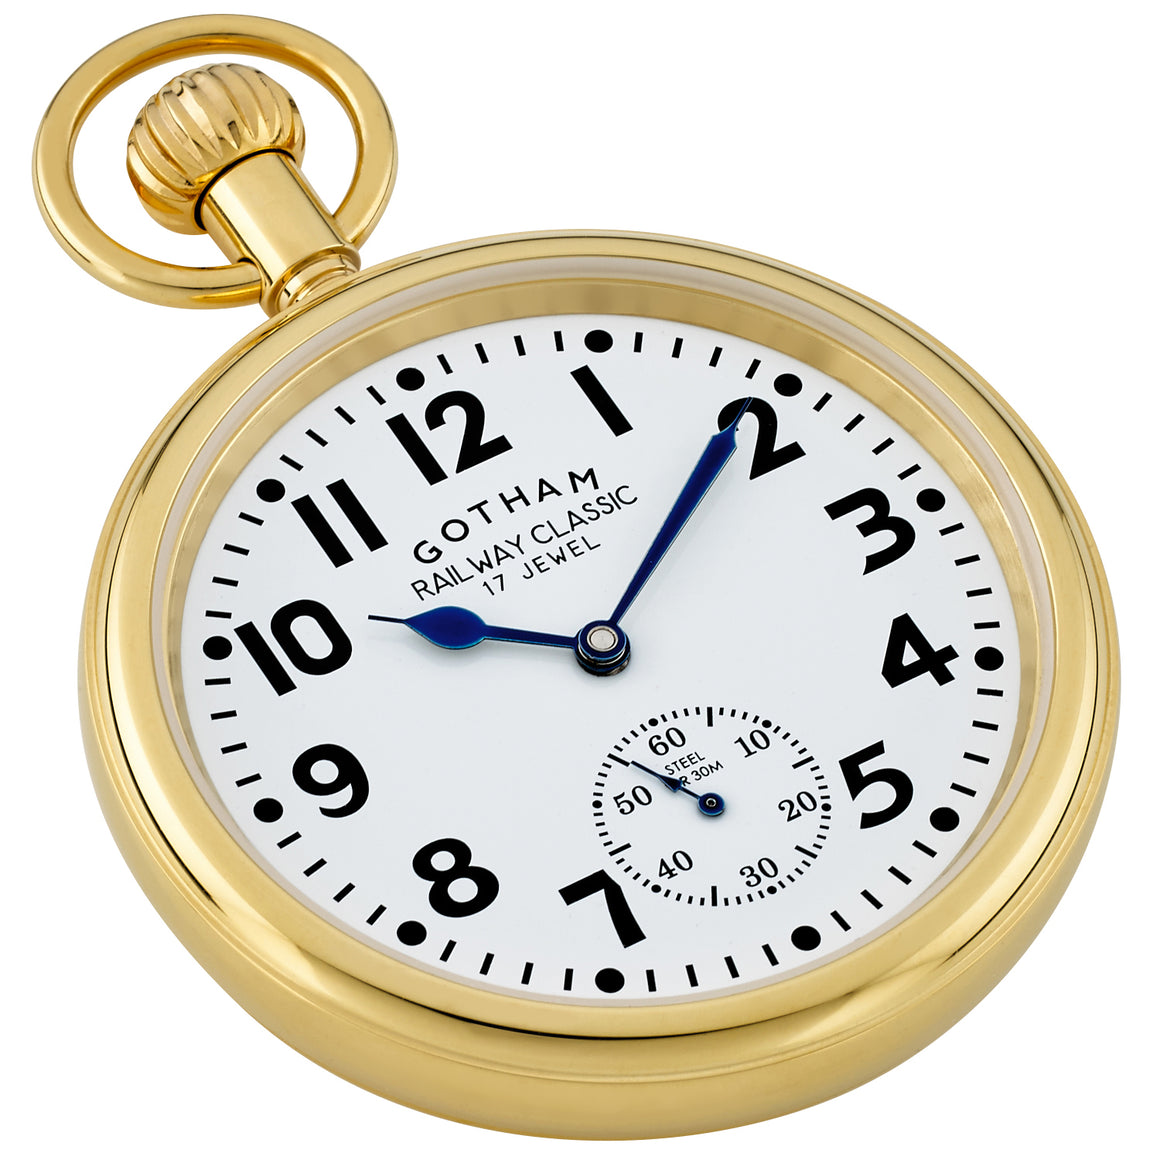 Gotham Men's Gold Plated Stainless Steel Mechanical Railroad Pocket Watch # GWC14104G